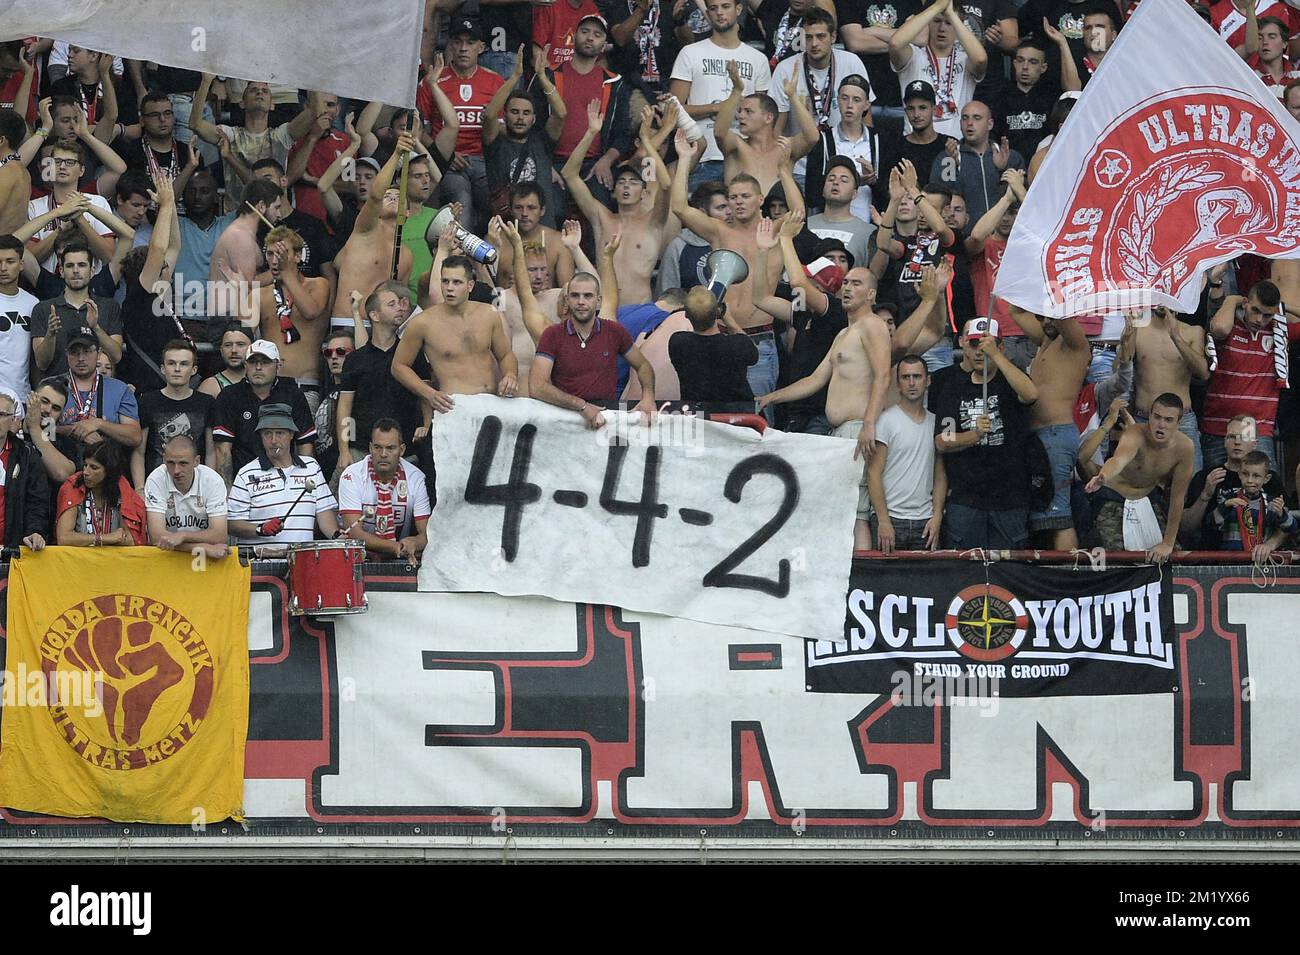 Standard's supporters pictured during the Jupiler Pro League match between Standard de Liege and KV Oostende, in Liege, Sunday 23 August 2015, on day 05 of the Belgian soccer championship.  Stock Photo